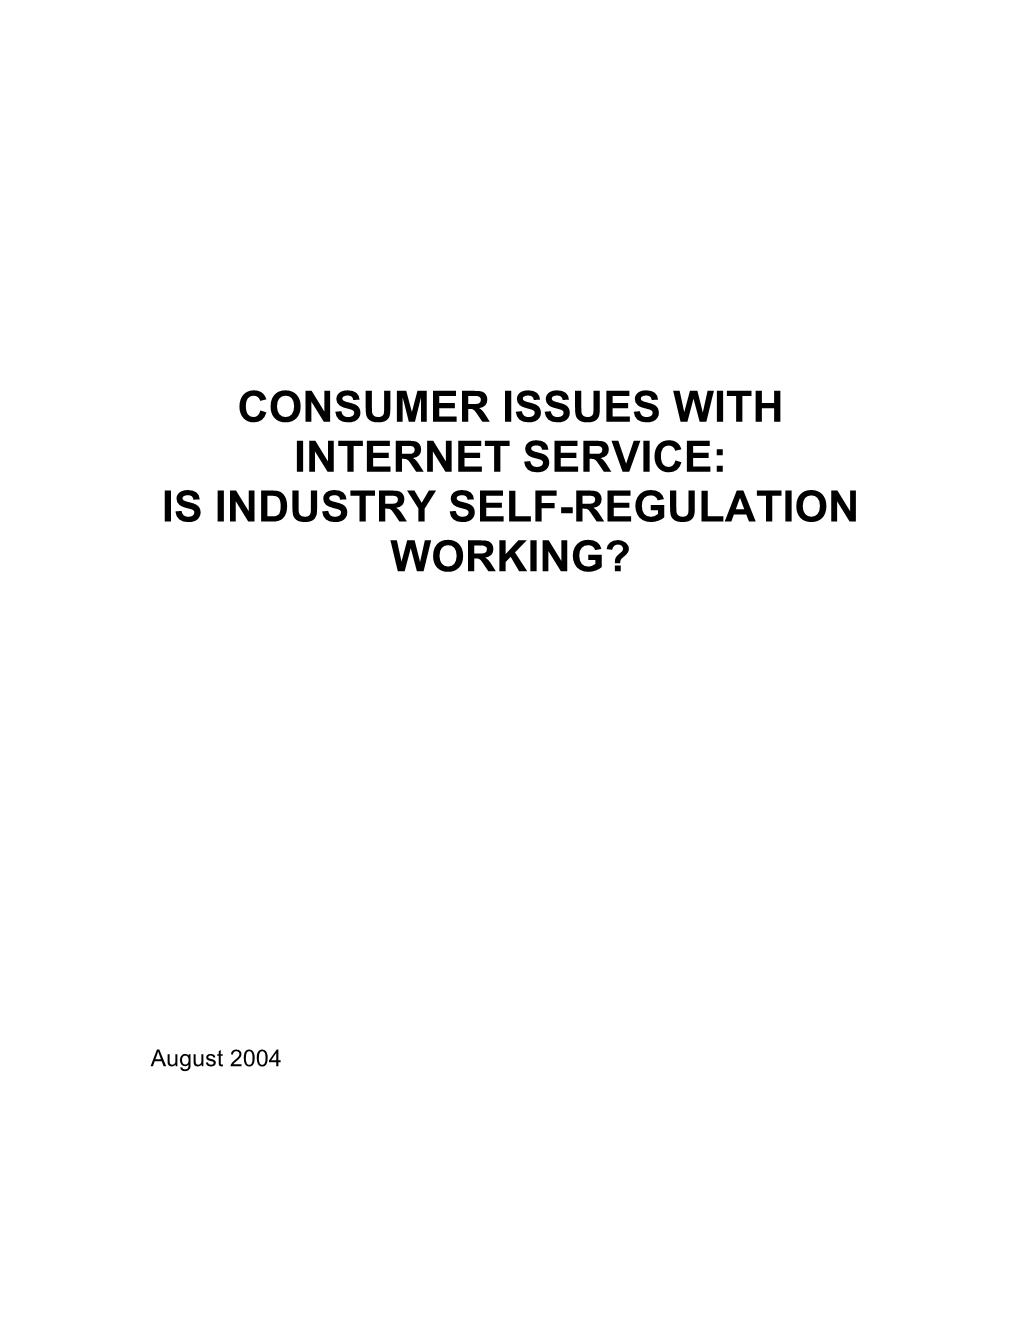 Consumer Issues with Internet Service: Is Industry Self-Regulation Working?